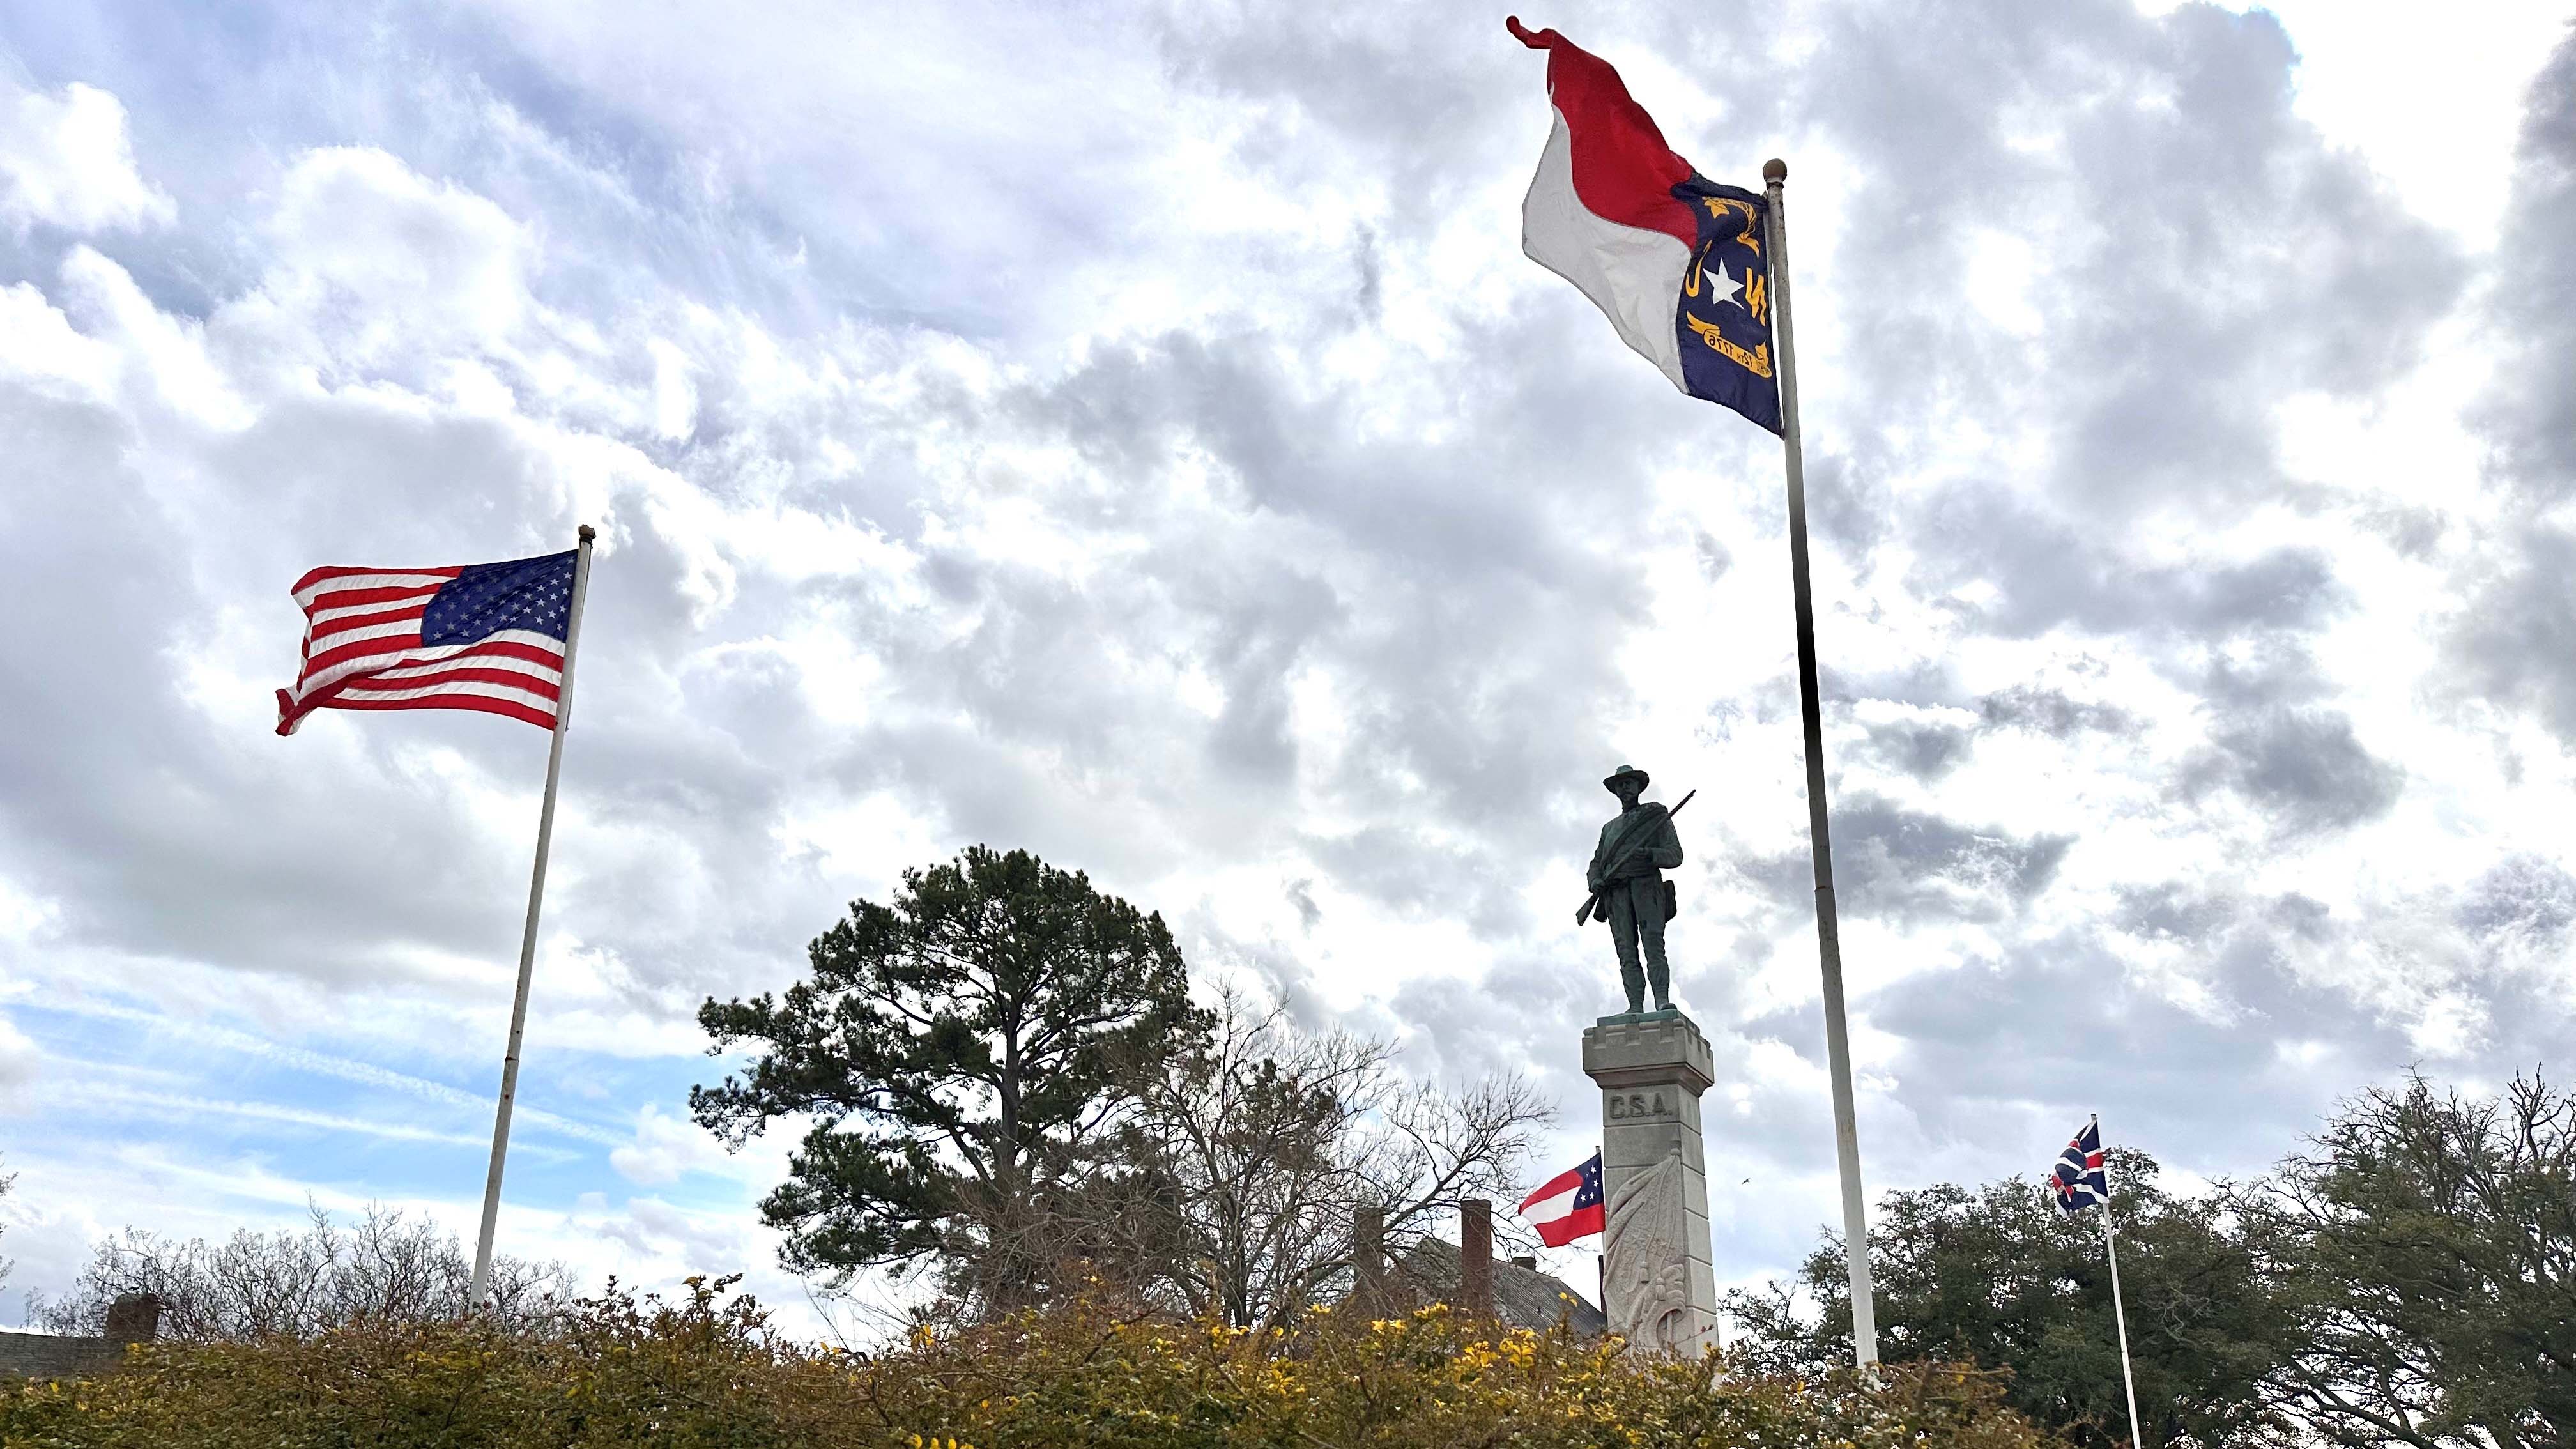 Groups who want Edenton, N.C.’s Confederate monument to stay at its waterfront location argue it’s a veteran’s monument before anything else. (Image: Mechelle Hankerson)